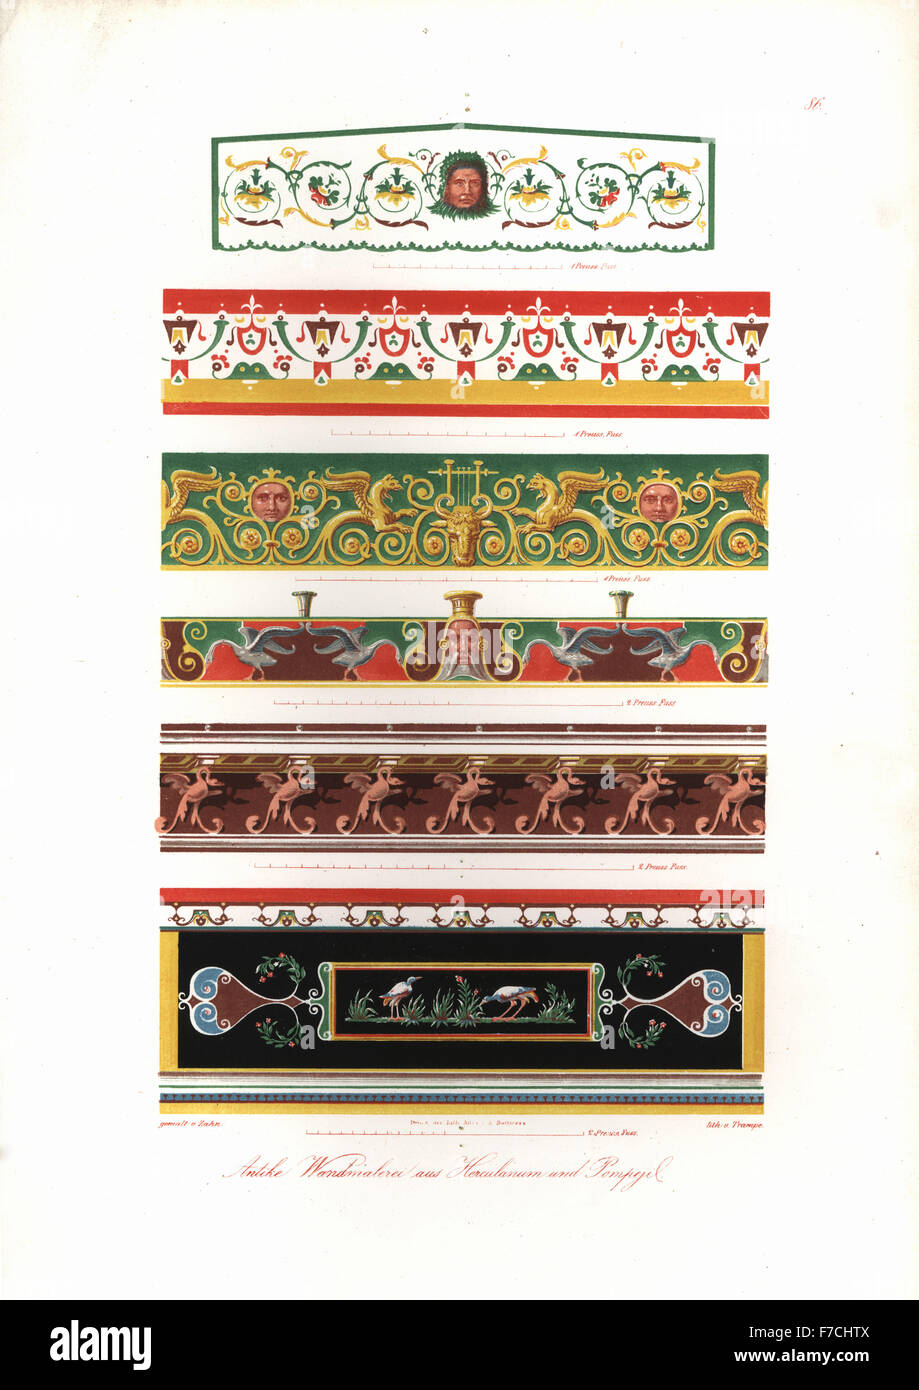 Antique wall paintings from Herculaneum and Pompeii. Handcoloured lithograph by Trampe after an illustration by Wilhelm Zahn from his Ornament of All Classical Art Eras, Ornamente aller klassischen Kunst-Epochen, Reimer, Berlin, 1834. Stock Photo